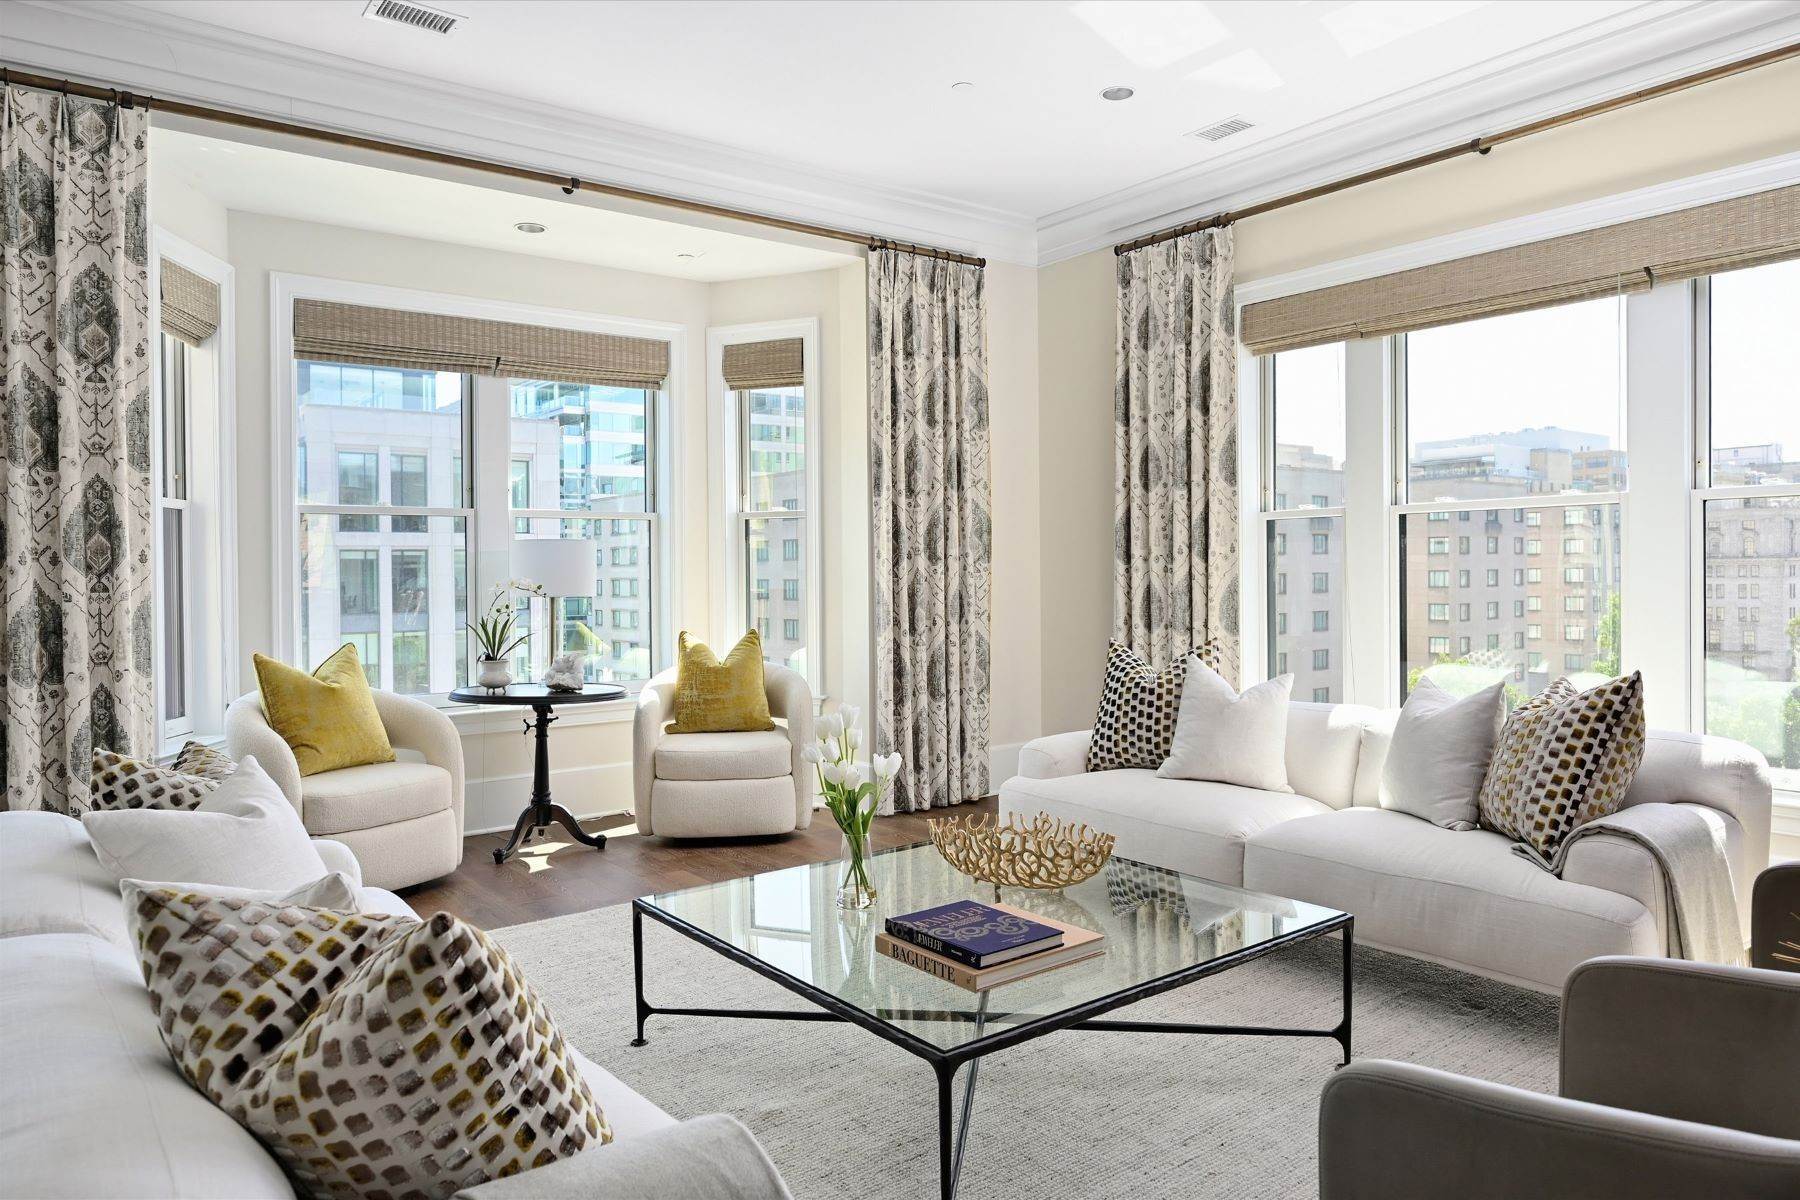 3. Single Family Homes for Sale at Boutique Residence in DC's Central Condomium Building 1108 NW 16th Street #701 Washington, District Of Columbia 20036 United States